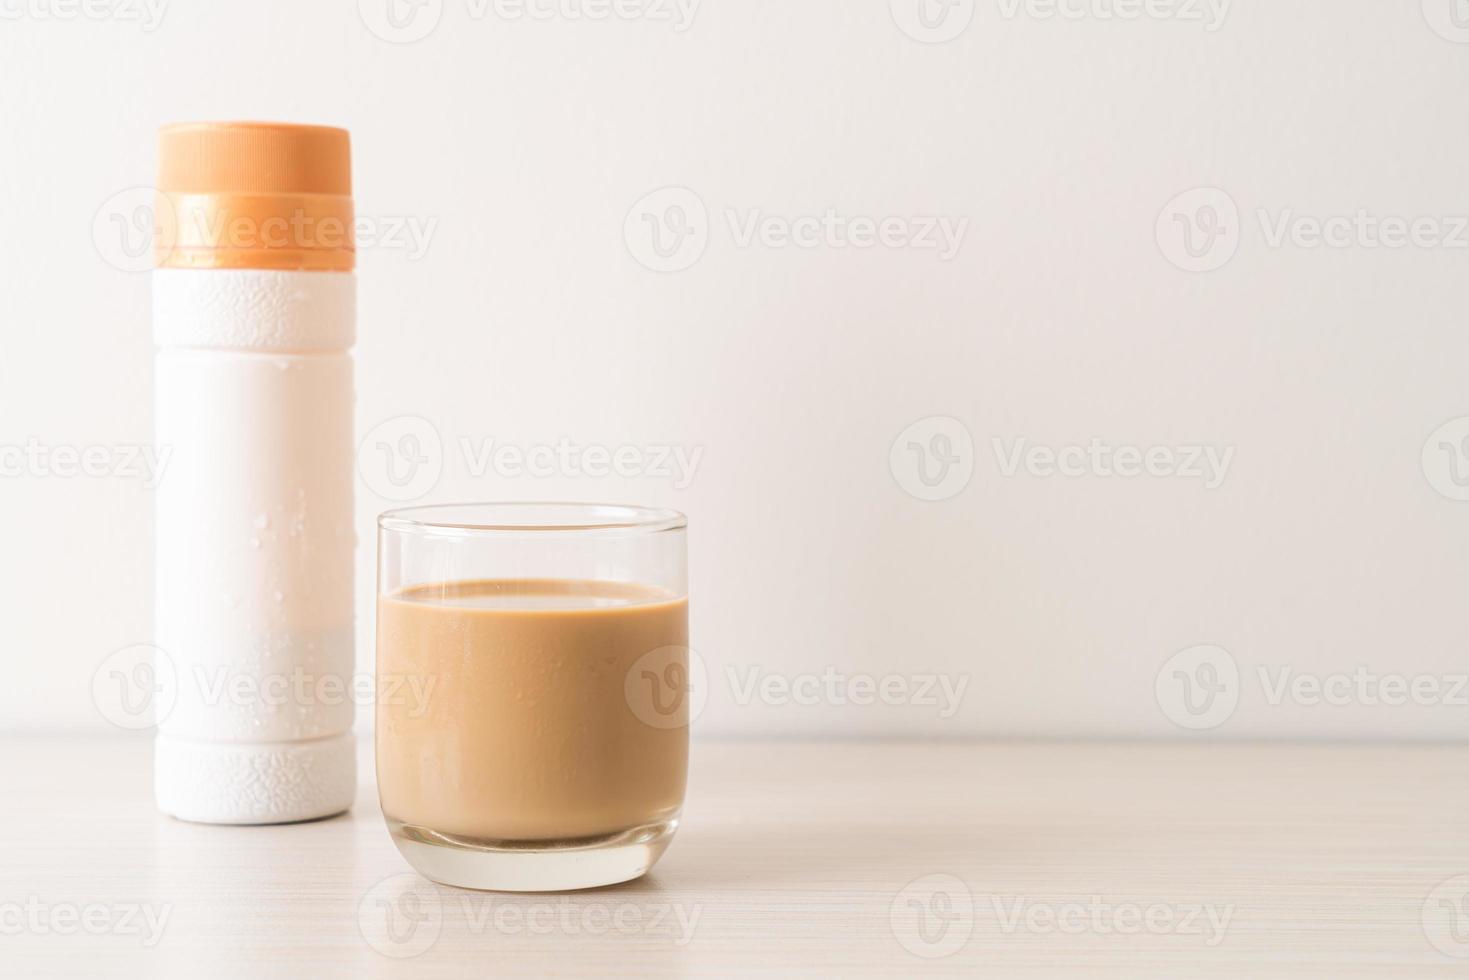 Coffee latte glass with ready to drink coffee bottles on the table photo